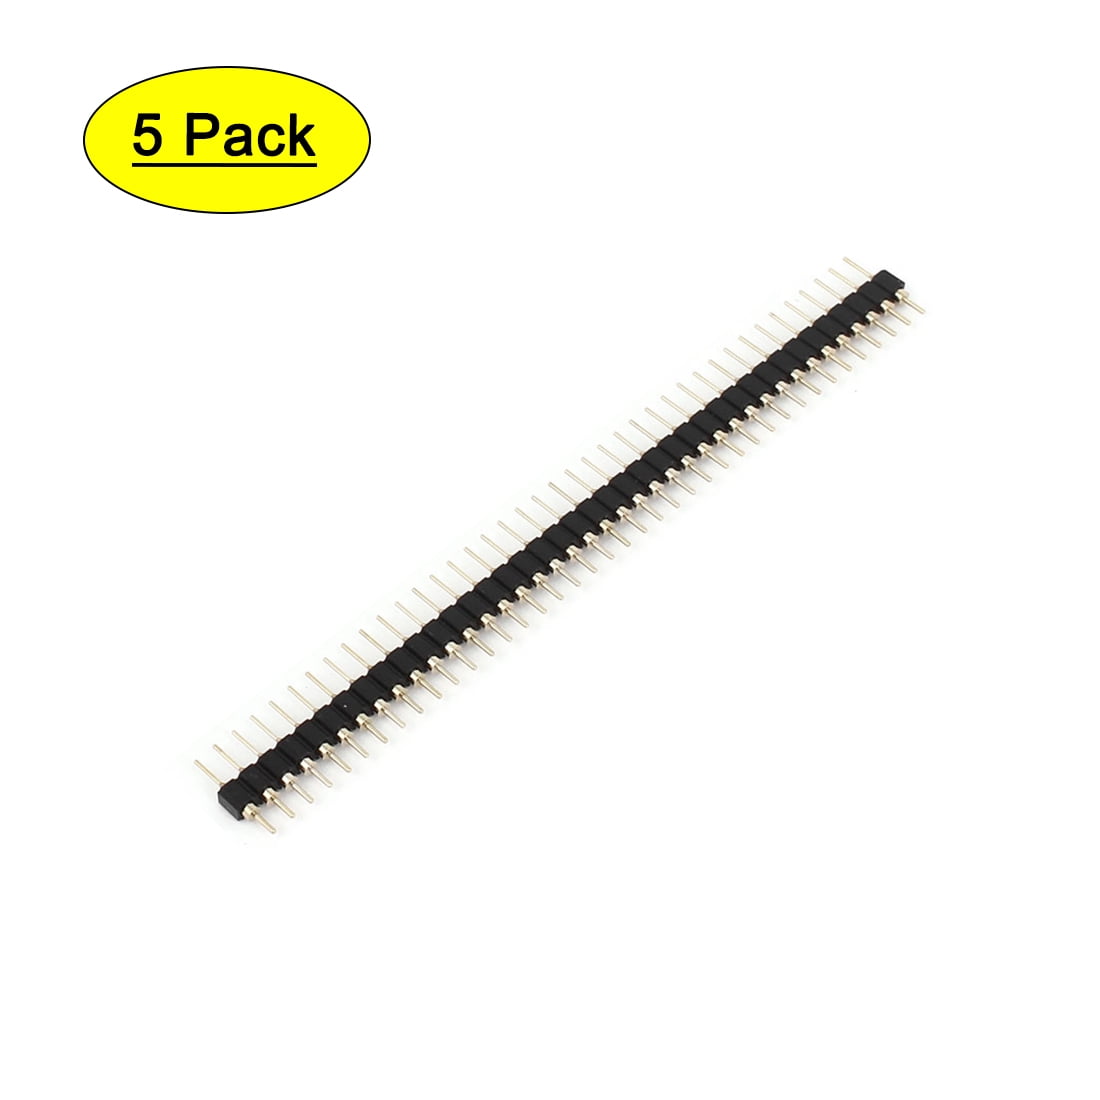 uxcell a15062500ux0447 Right Angle Single Row 40-pin 2.0mm Male Header for Breadboard Pack of 8